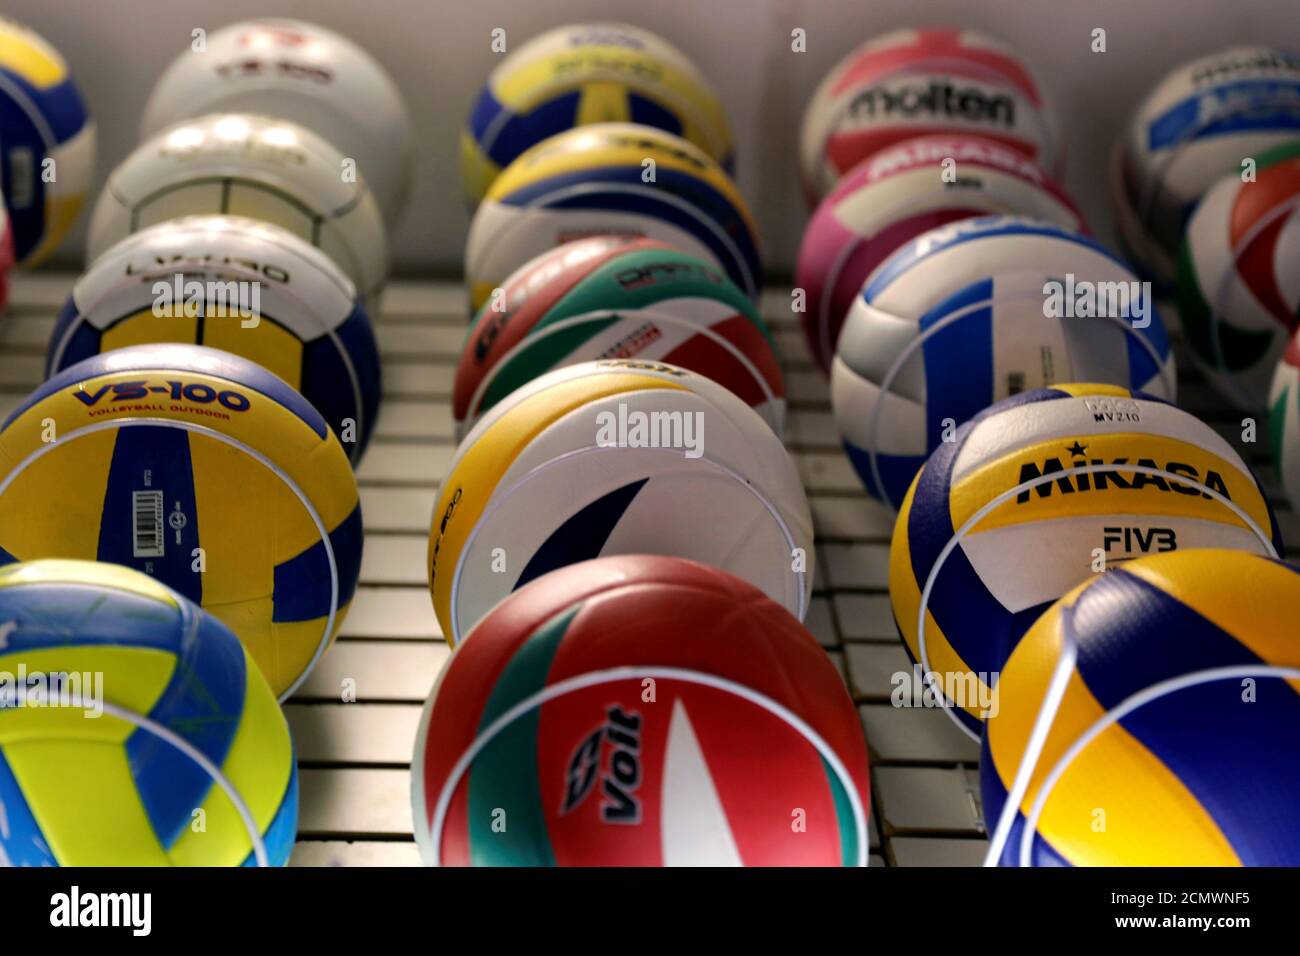 Volleyball balls Volt, Molten, Mikasa and other labels are seen inside a  shop in Mexico City, Mexico May 15, 2019. REUTERS/Carlos Jasso Stock Photo  - Alamy